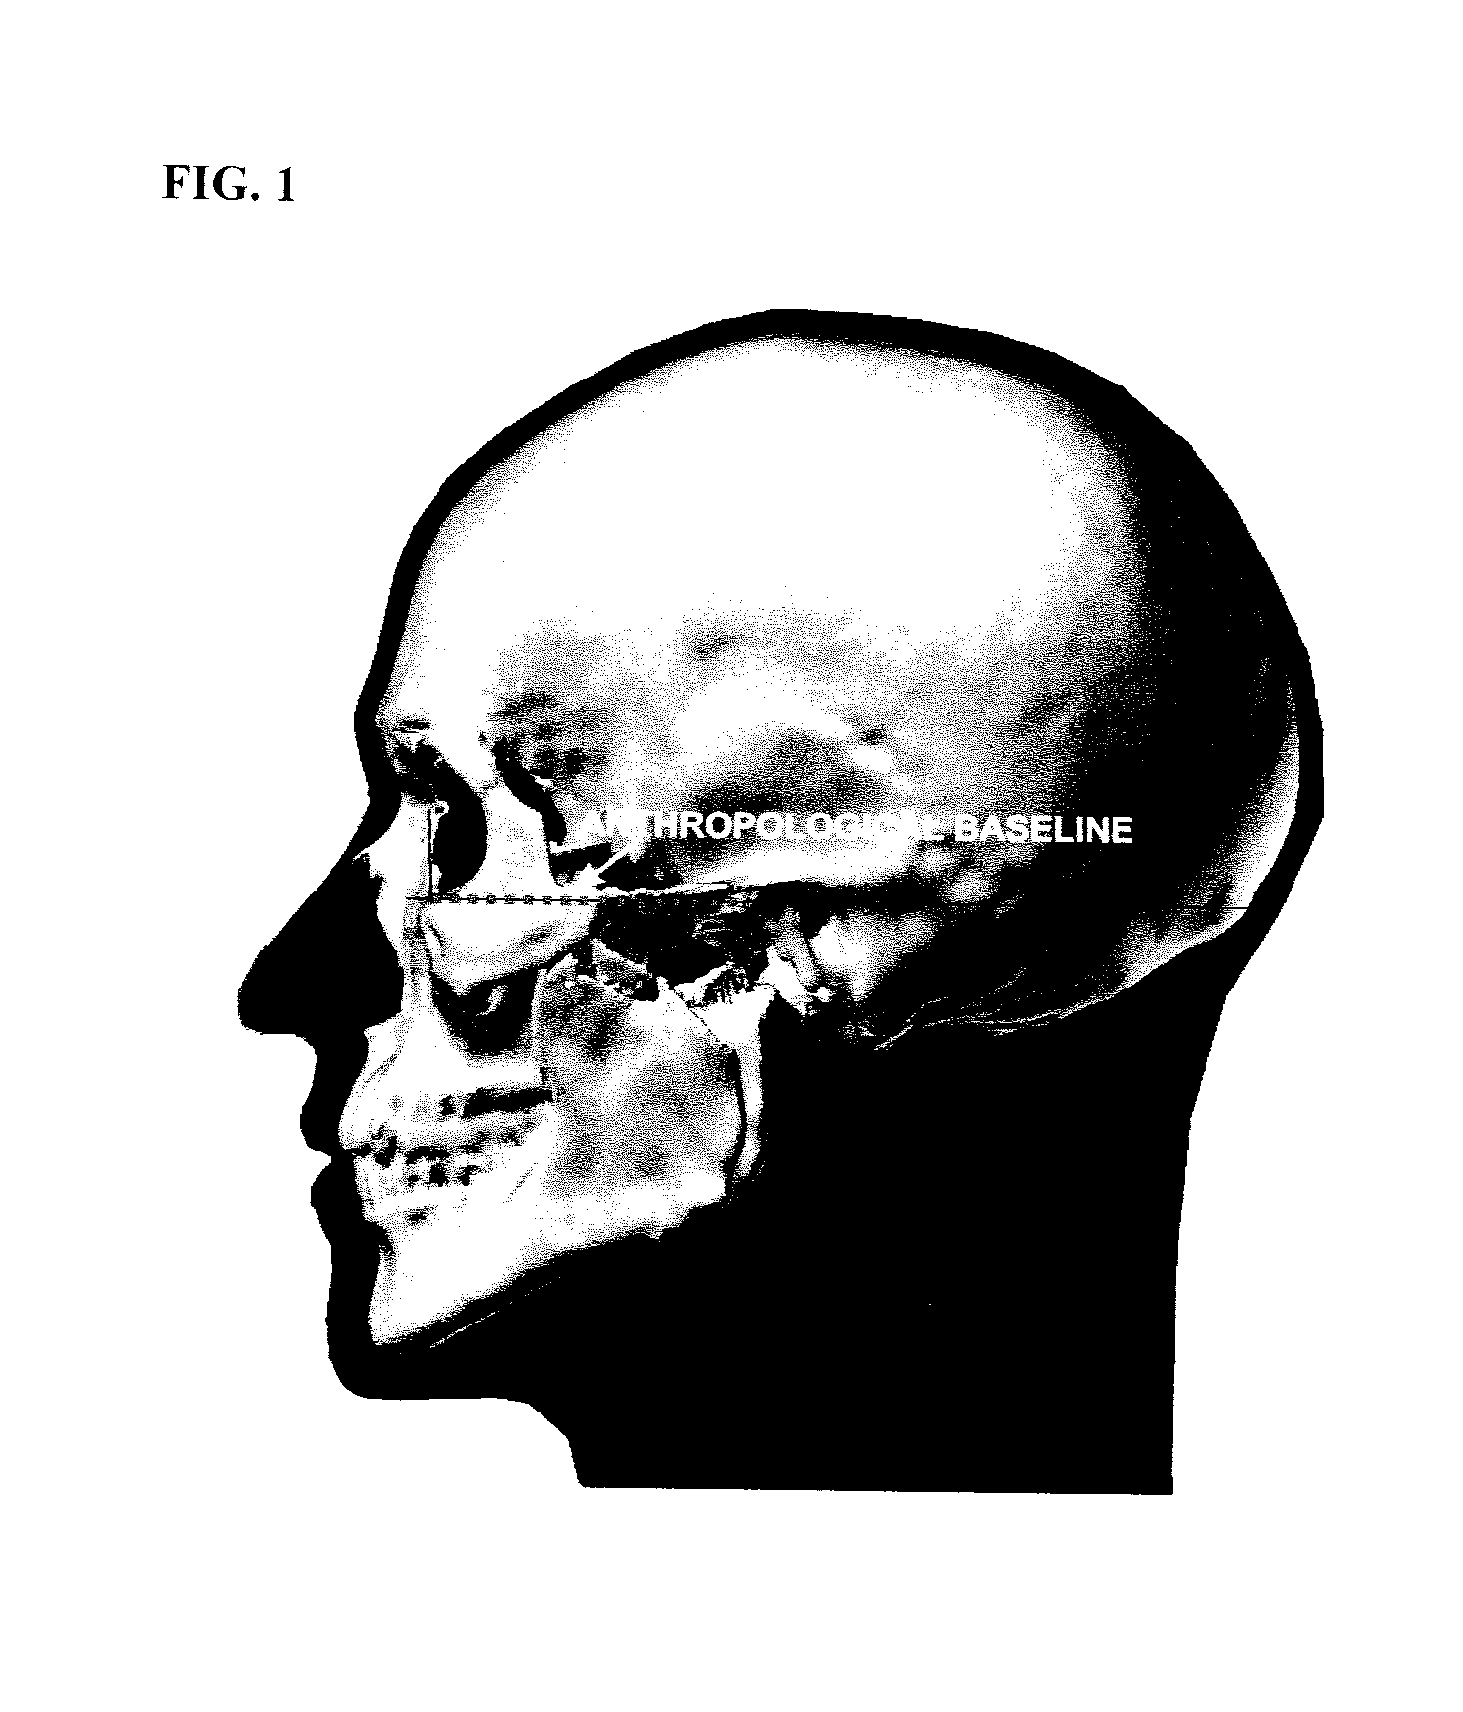 Method and apparatus for unambiguously determining orientation of a human head in 3D geometric modeling